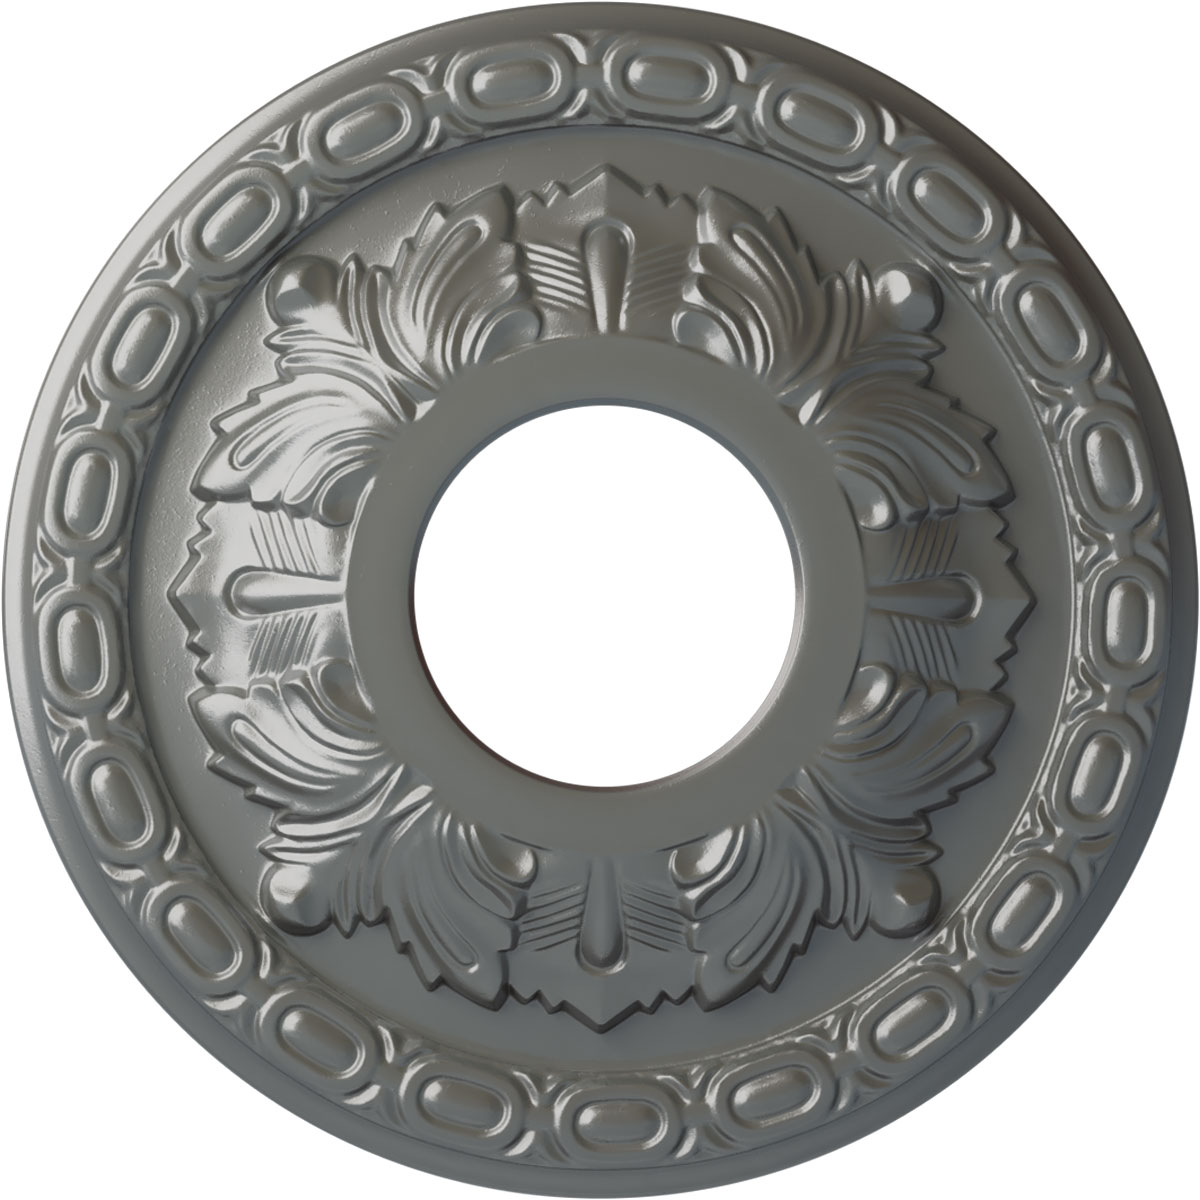 Ekena Millwork 11 3/8"OD x 3 5/8"ID x 1 1/8"P Leaf Ceiling Medallion (Fits Canopies up to 4 3/4"), Hand-Painted Silver - image 1 of 5